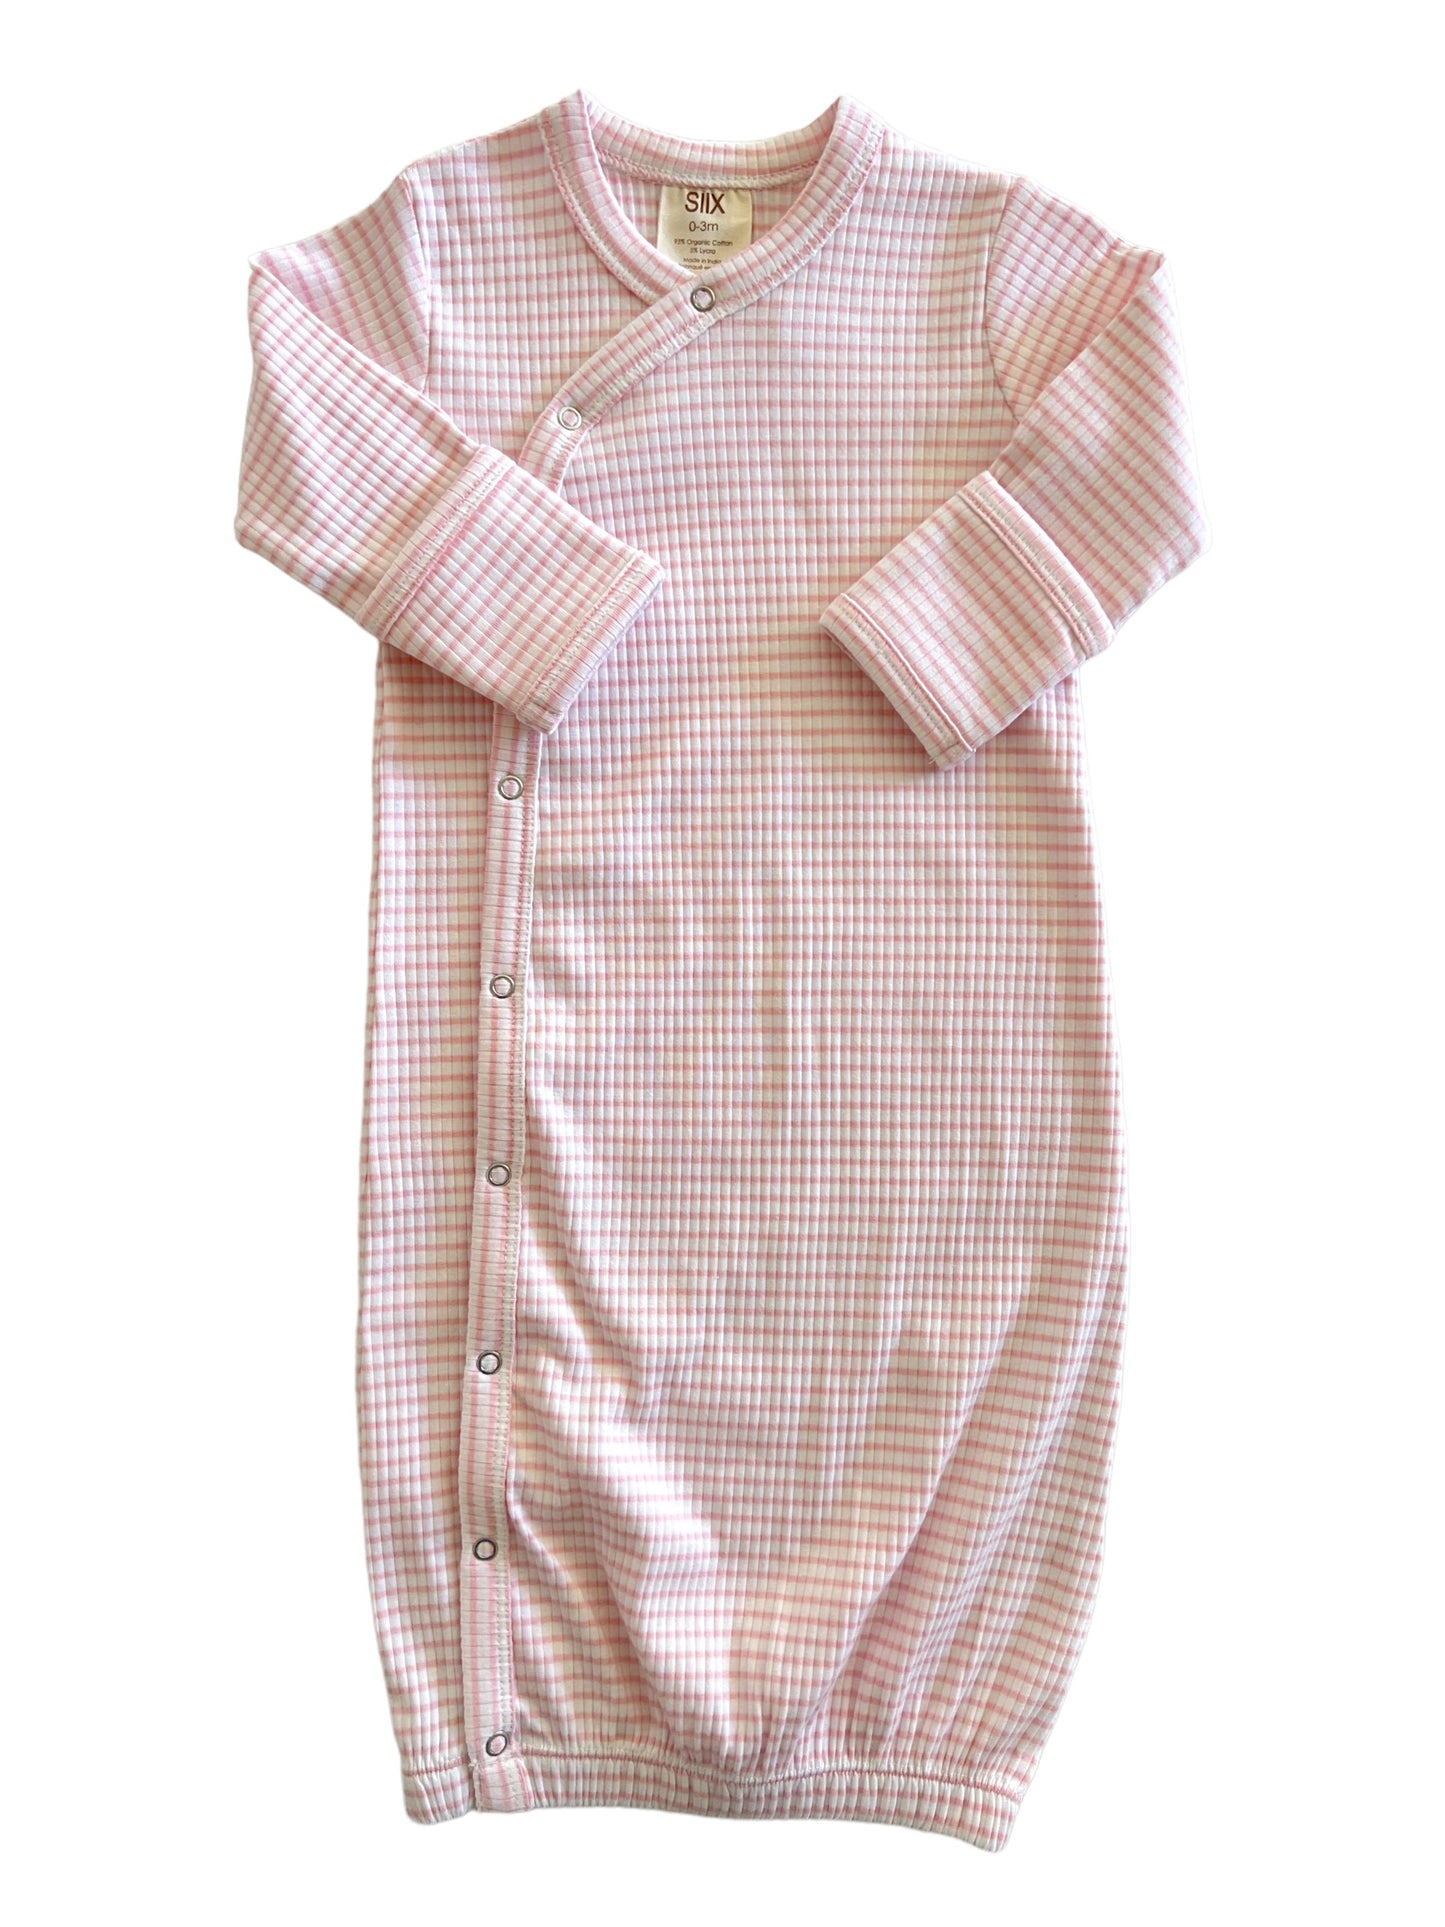 Pink Stripe / Organic Ribbed Gown